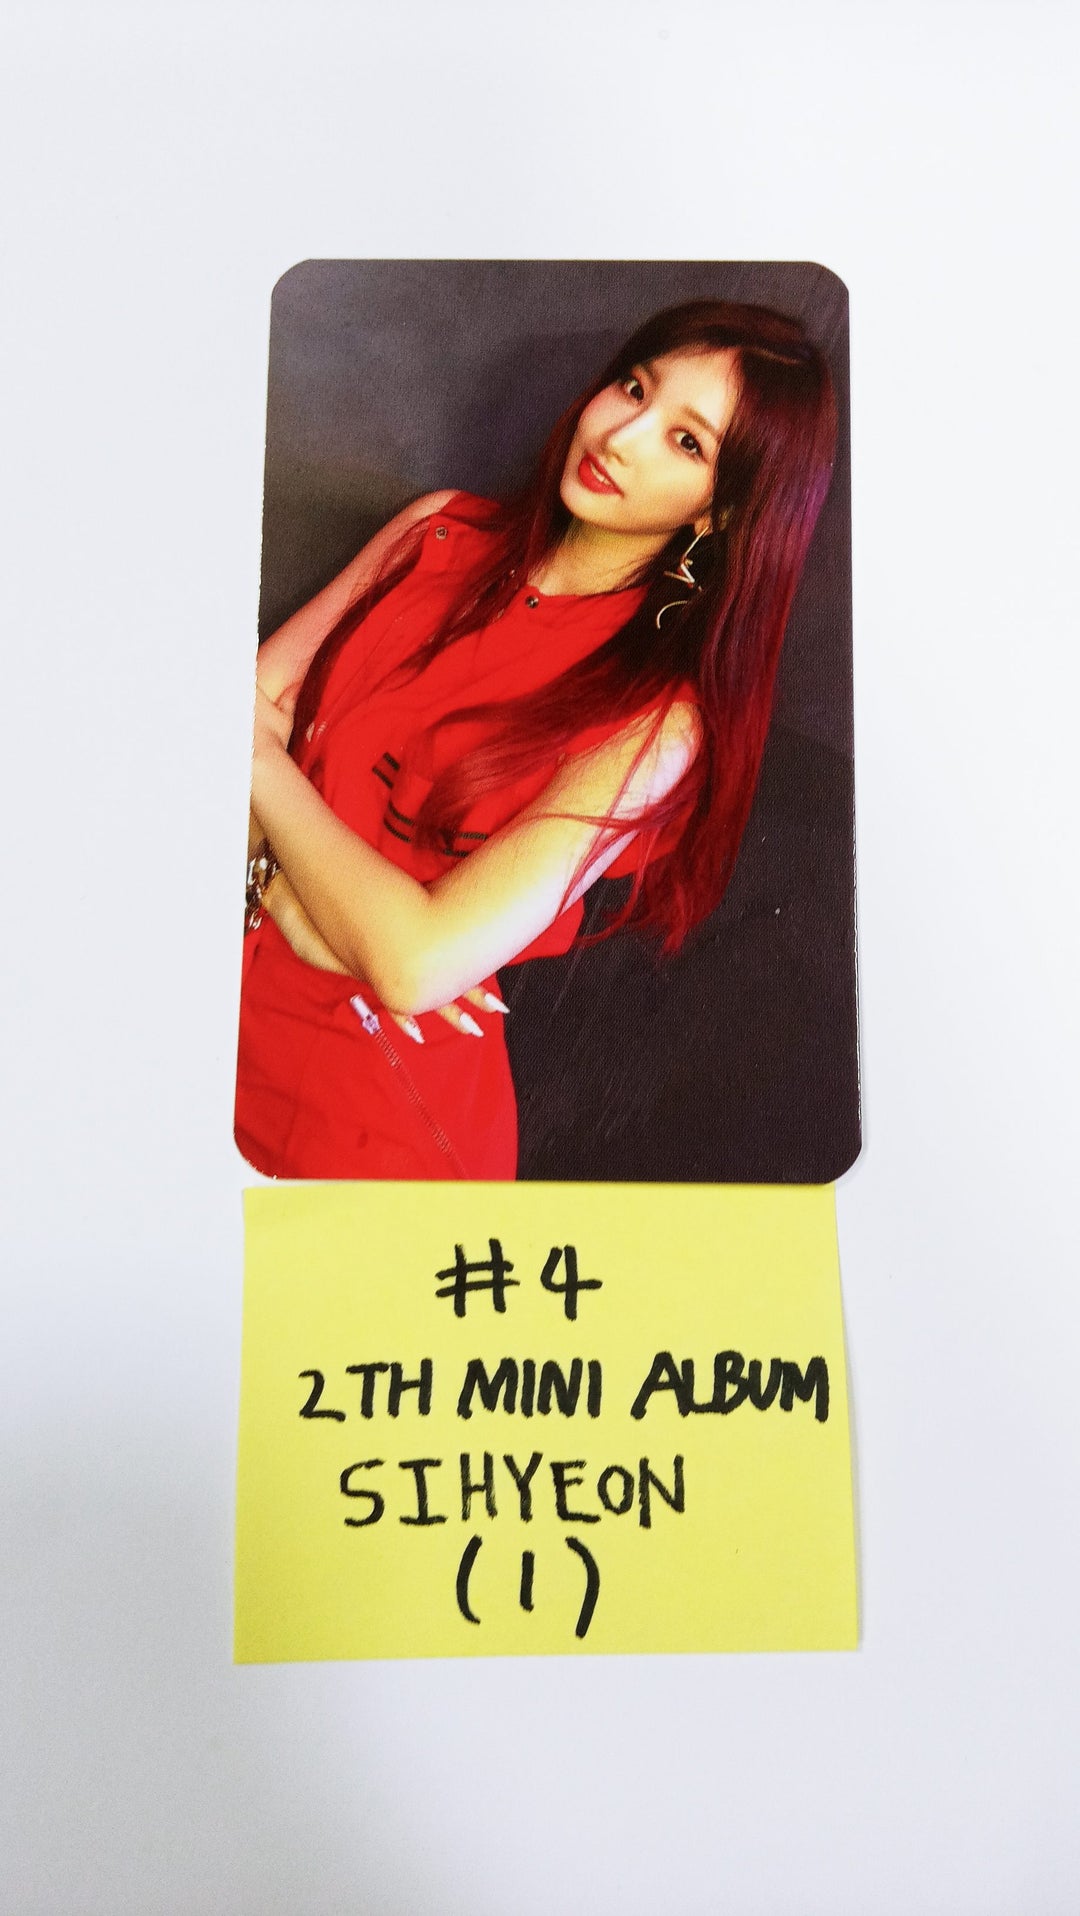 Everglow "77.82X-78.29" - Official Photocard